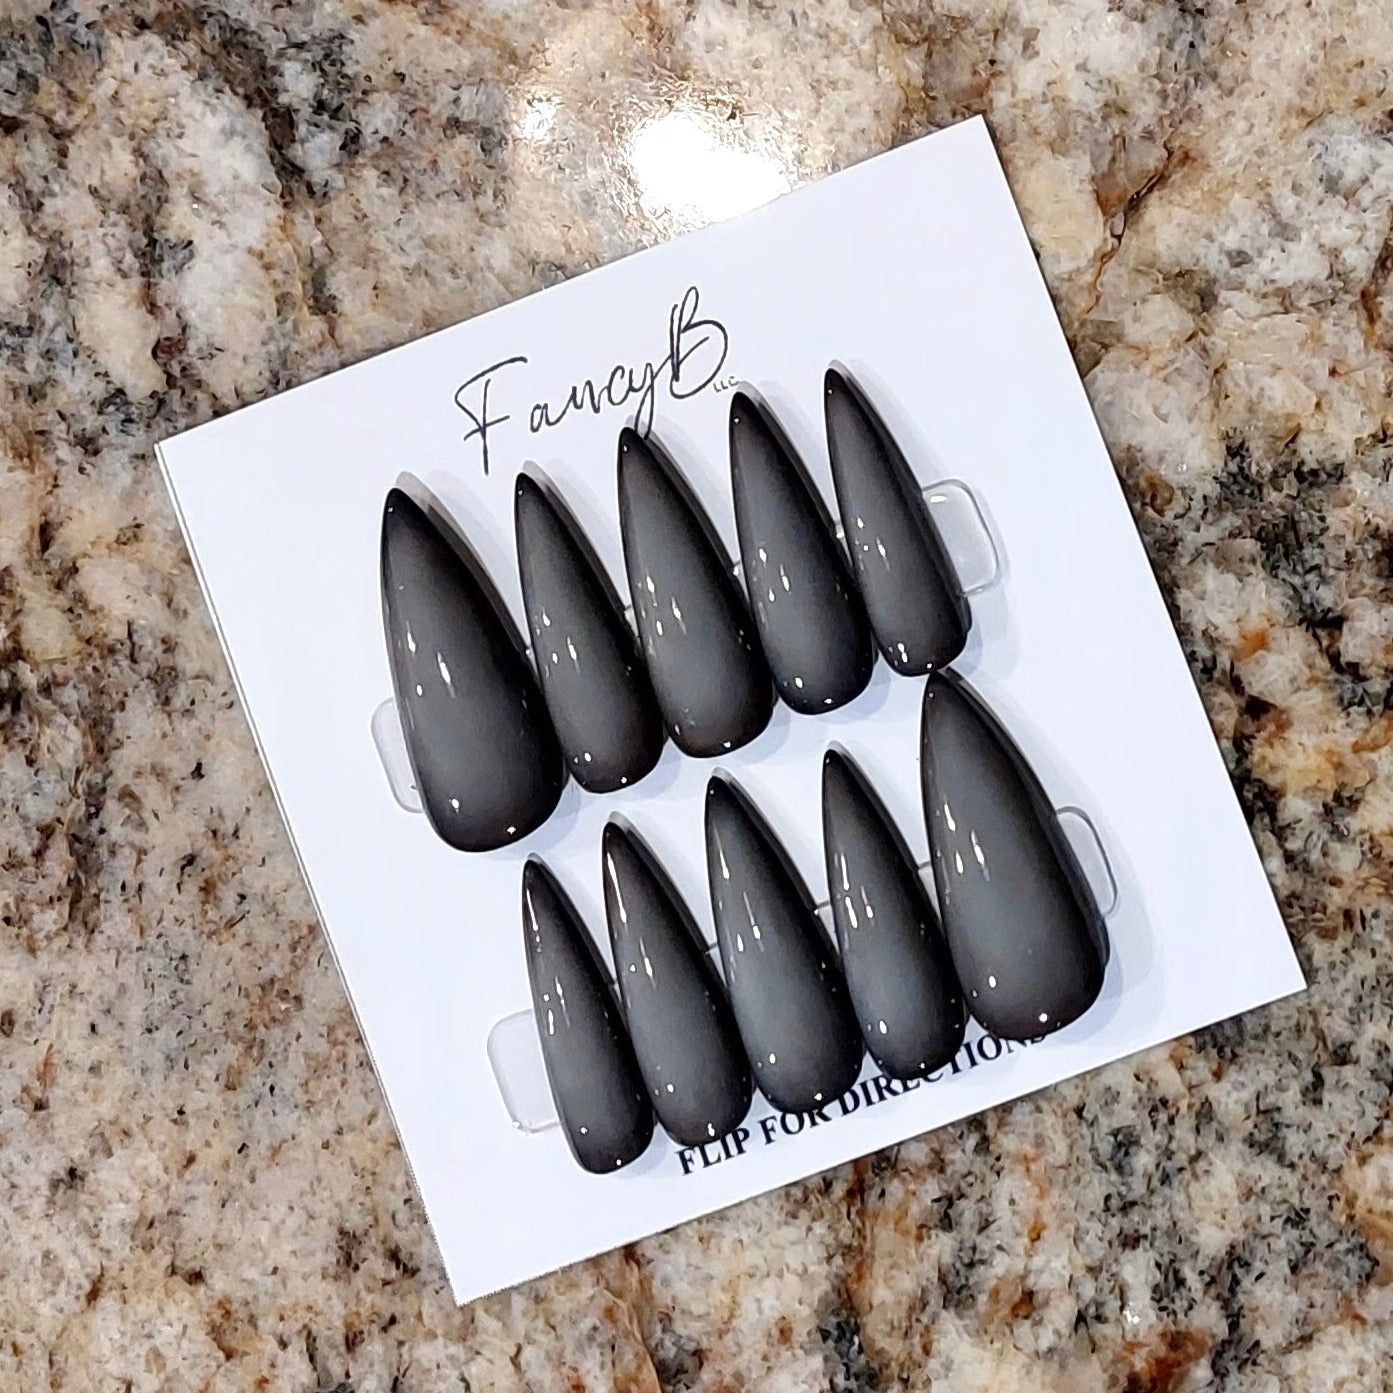 Custom edge ombre nails with light grey center and black fade edges. Perfect statement nails for the dark goth style lovers!